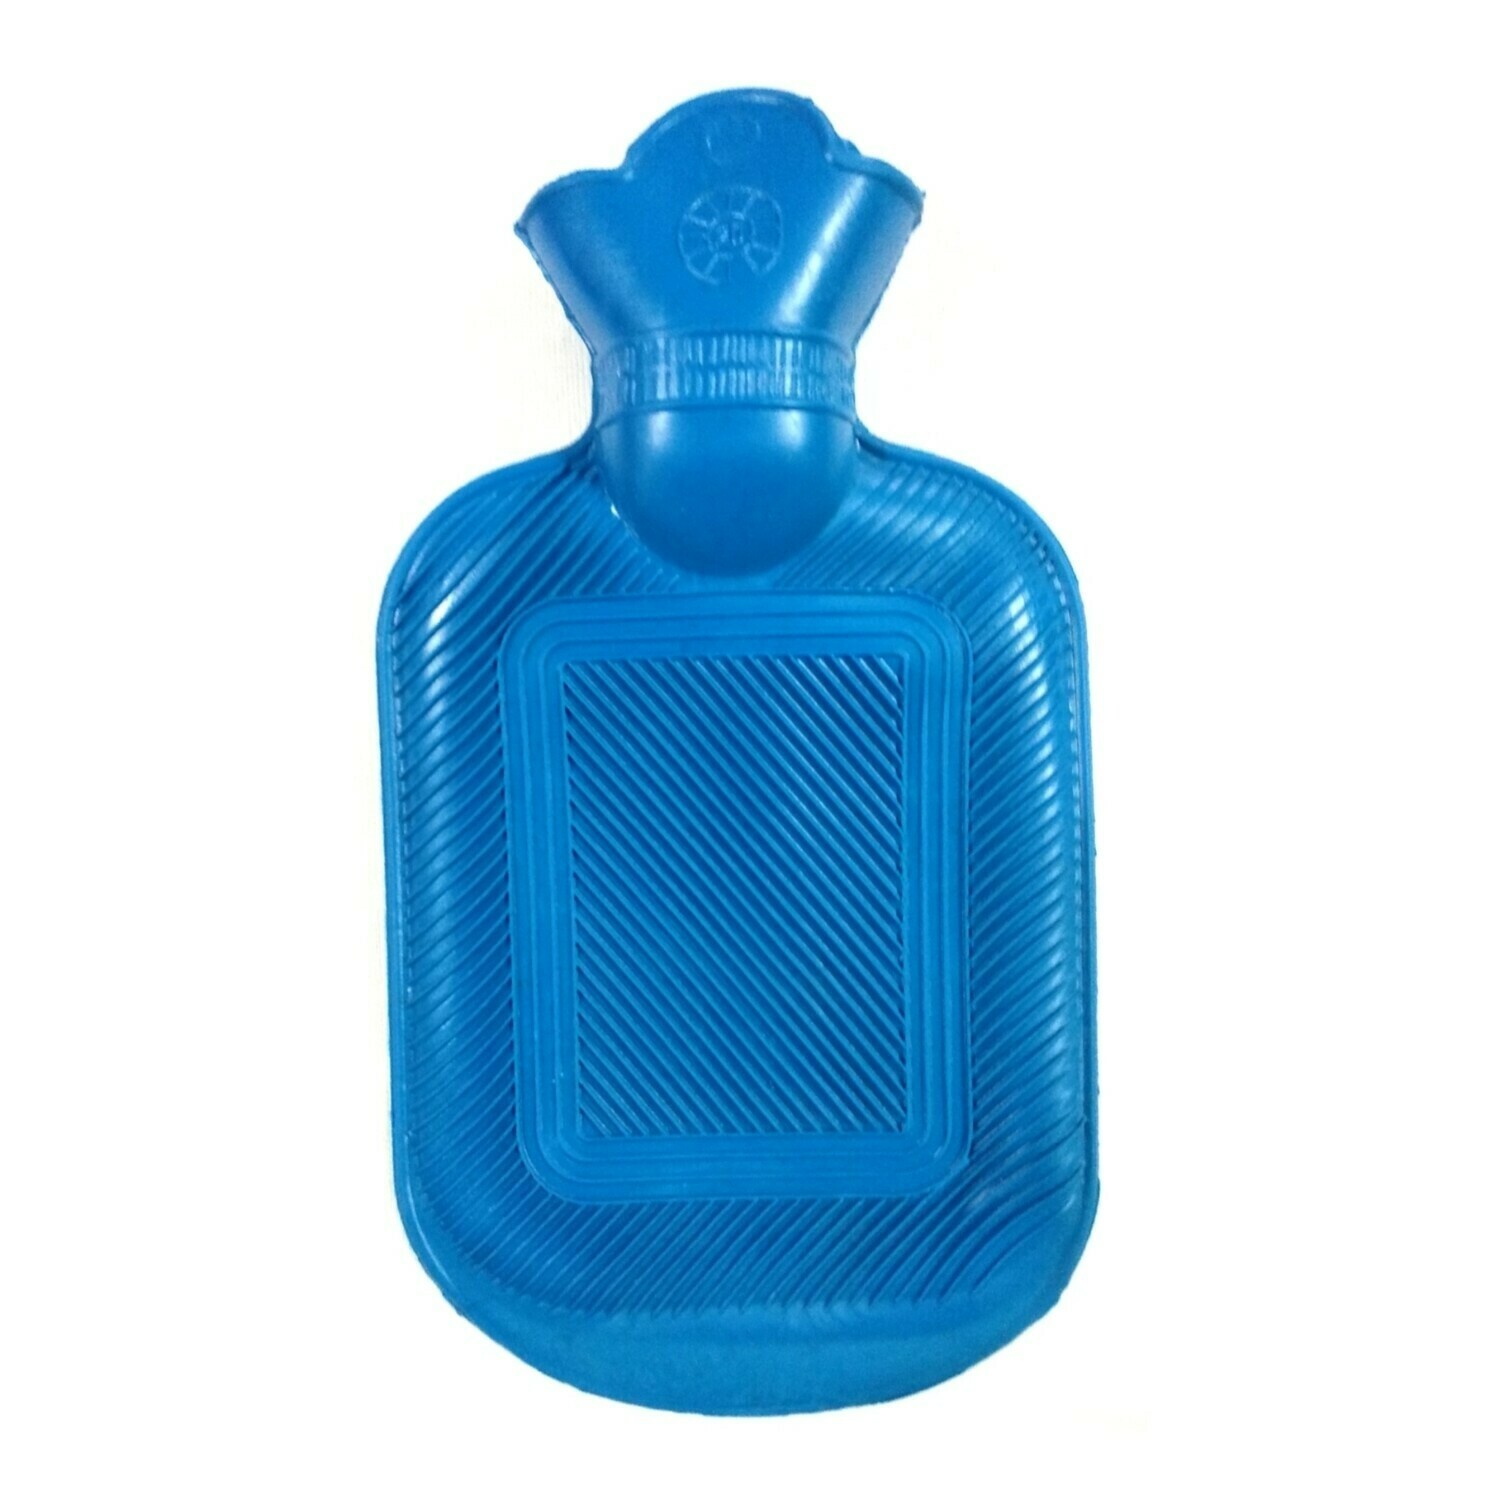 Hot Water Bag 250ml for Pain Relief, Massaging 